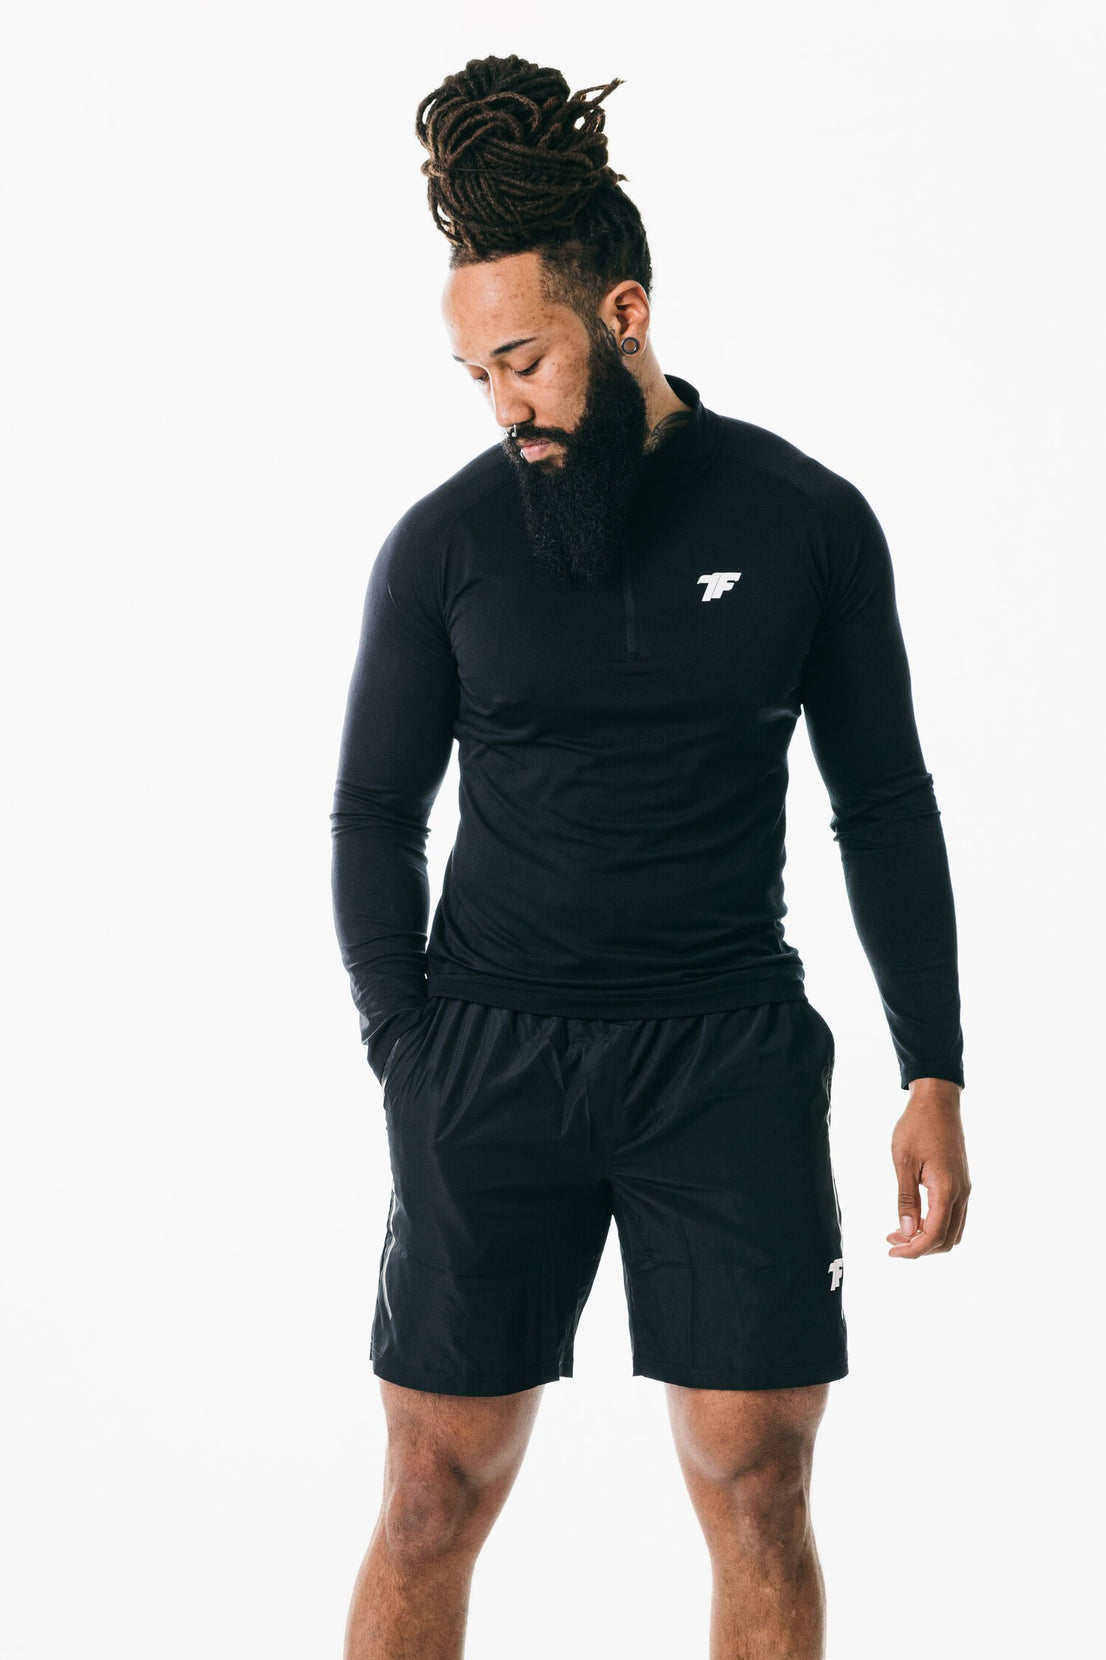 A bearded man wearing True Form UK Black Muscle Fit Zip Tshirt for Gym